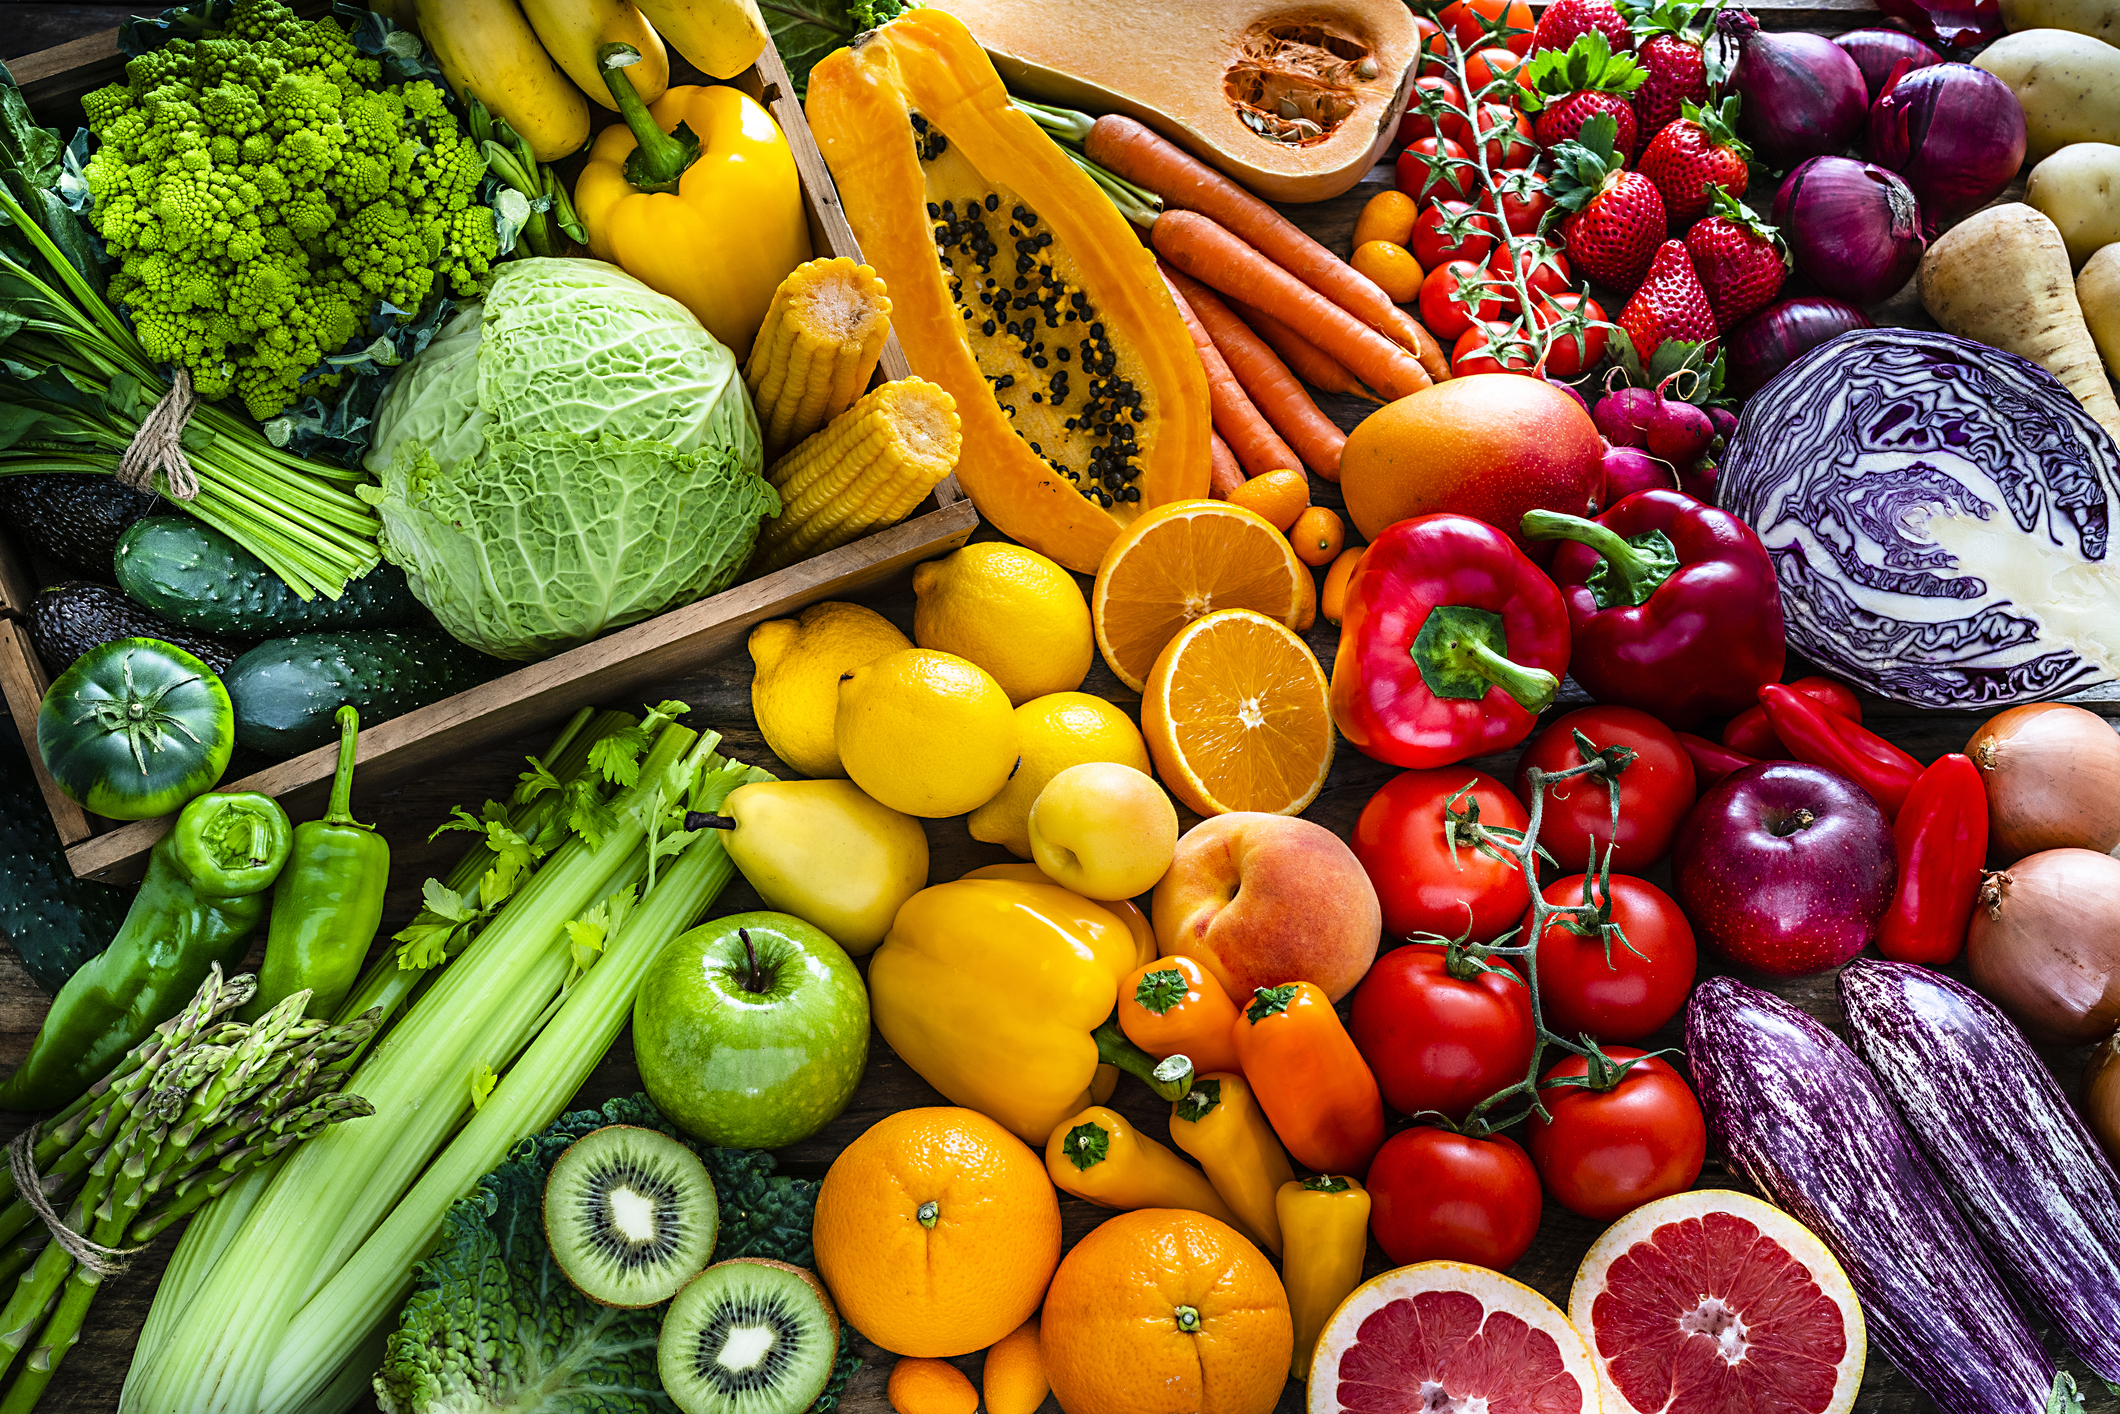 A colorful array of fruits and vegetables.